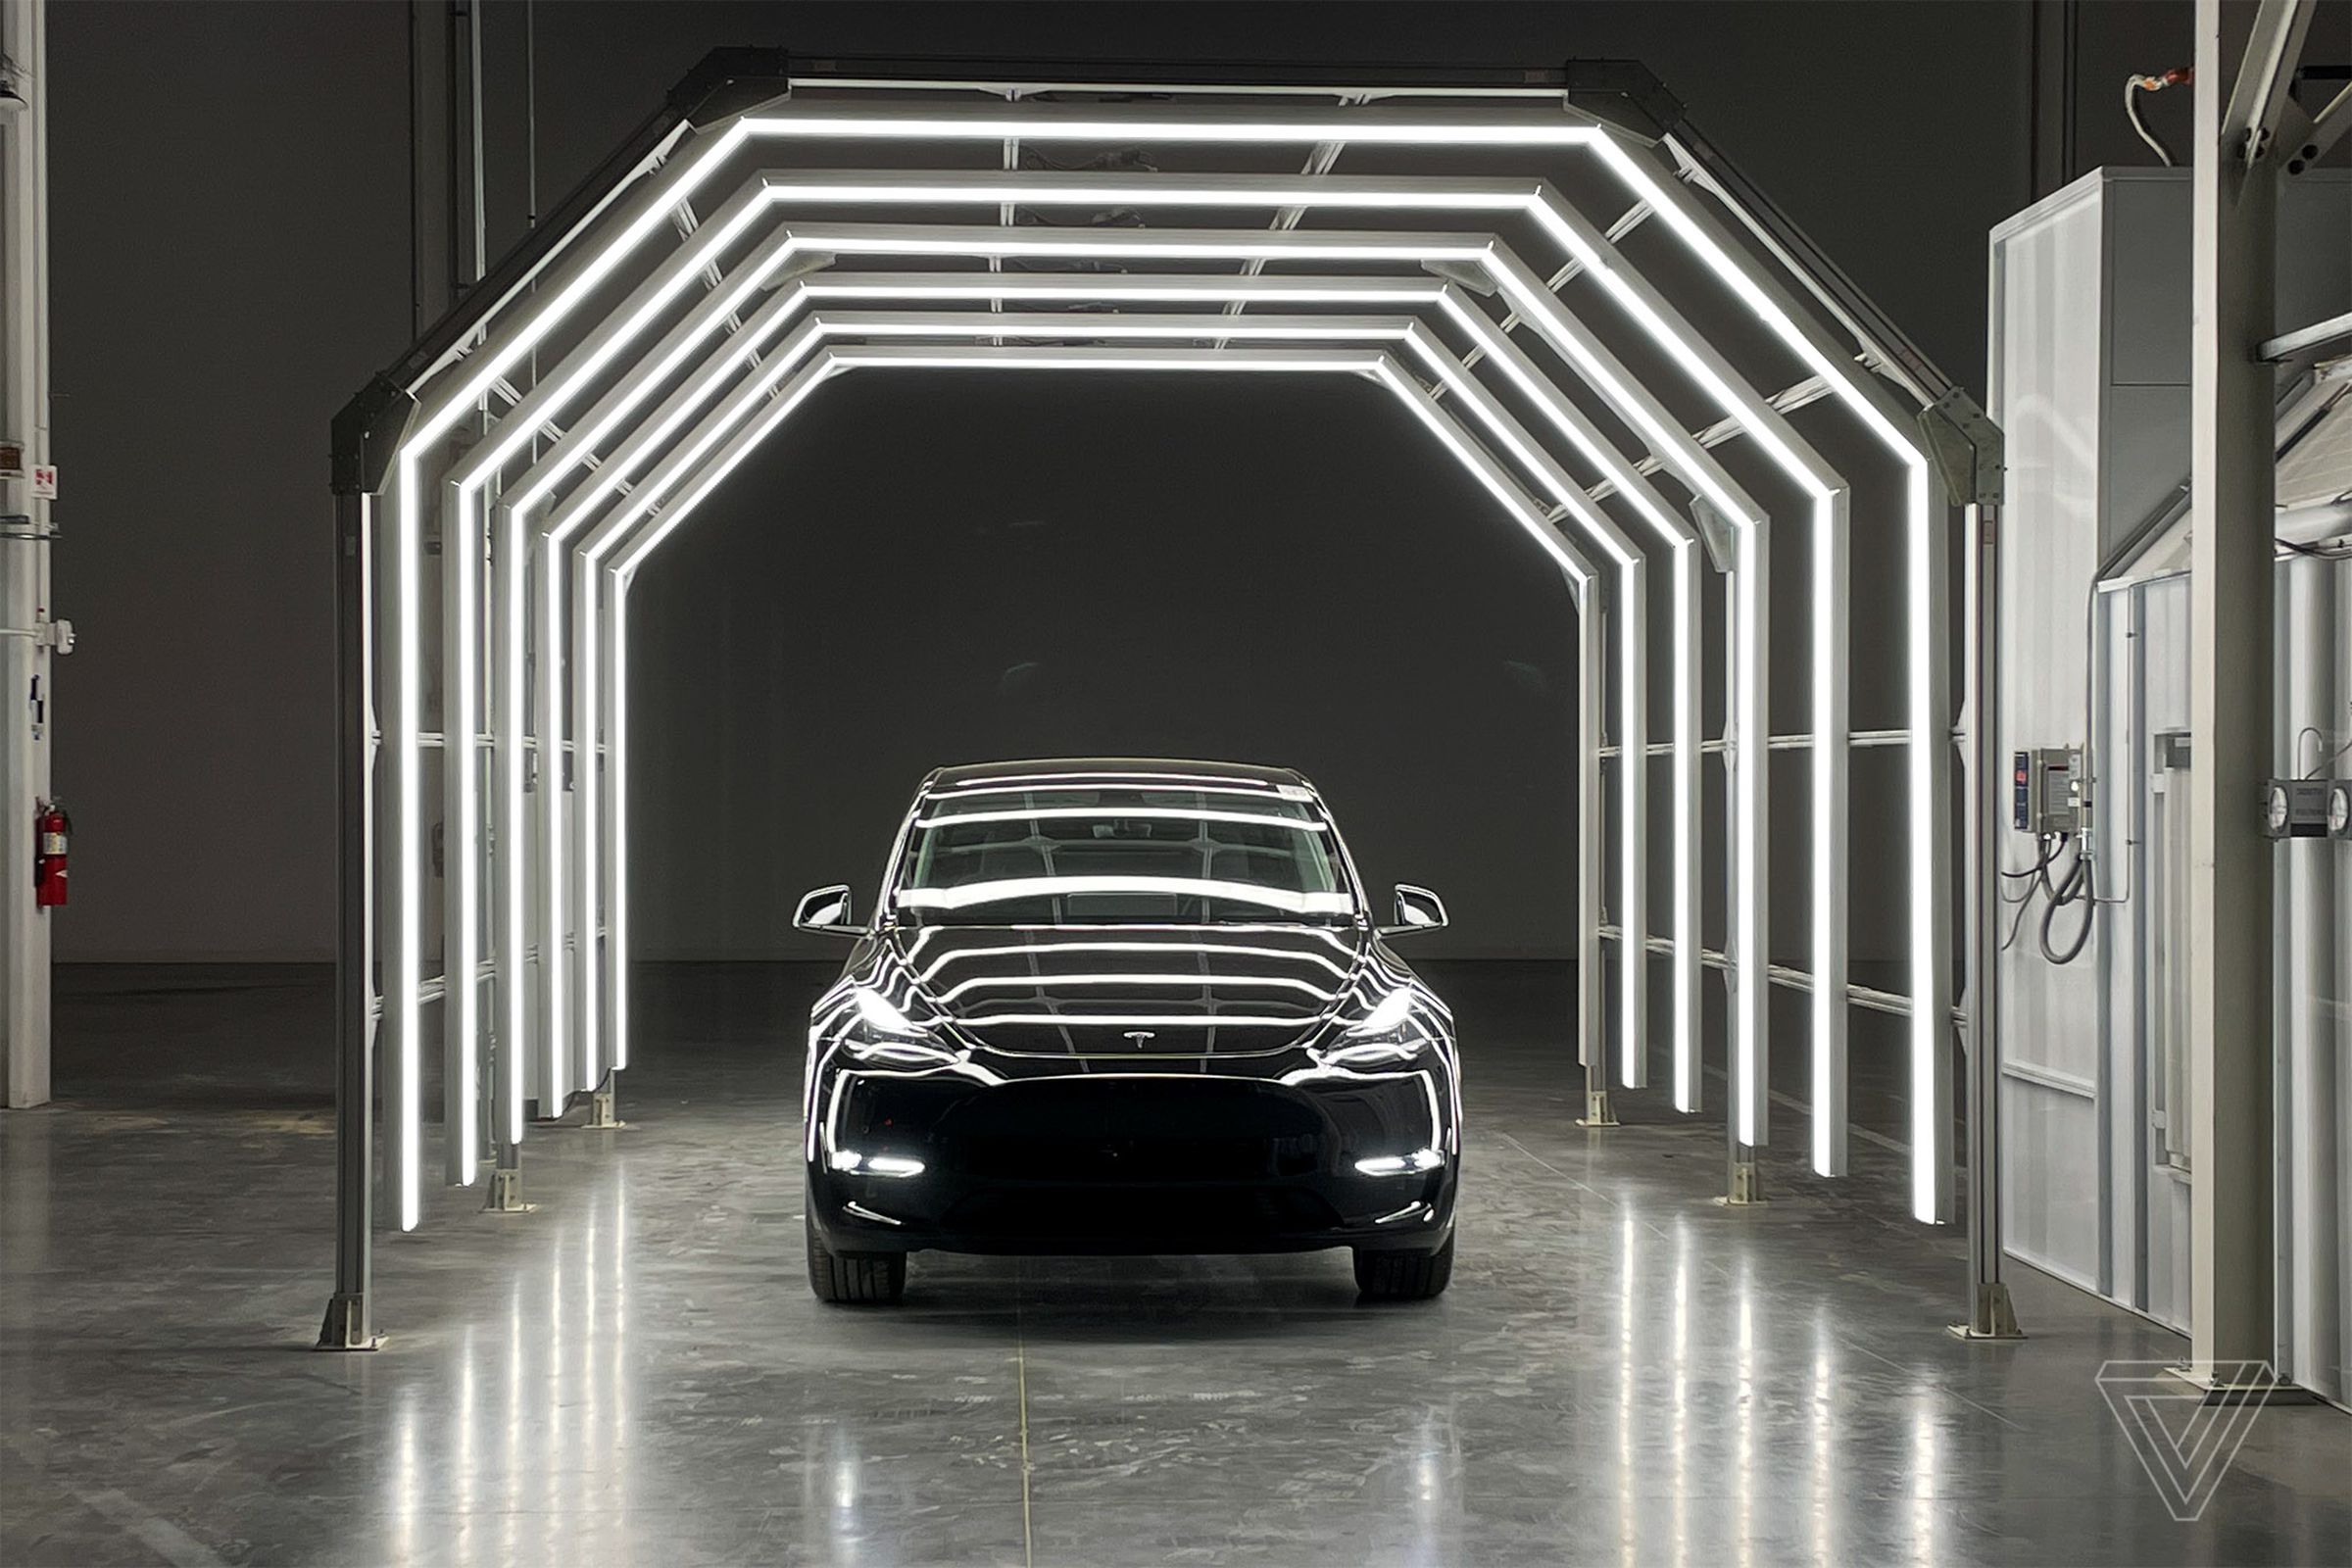 A Tesla vehicle in a lighted tunnel.